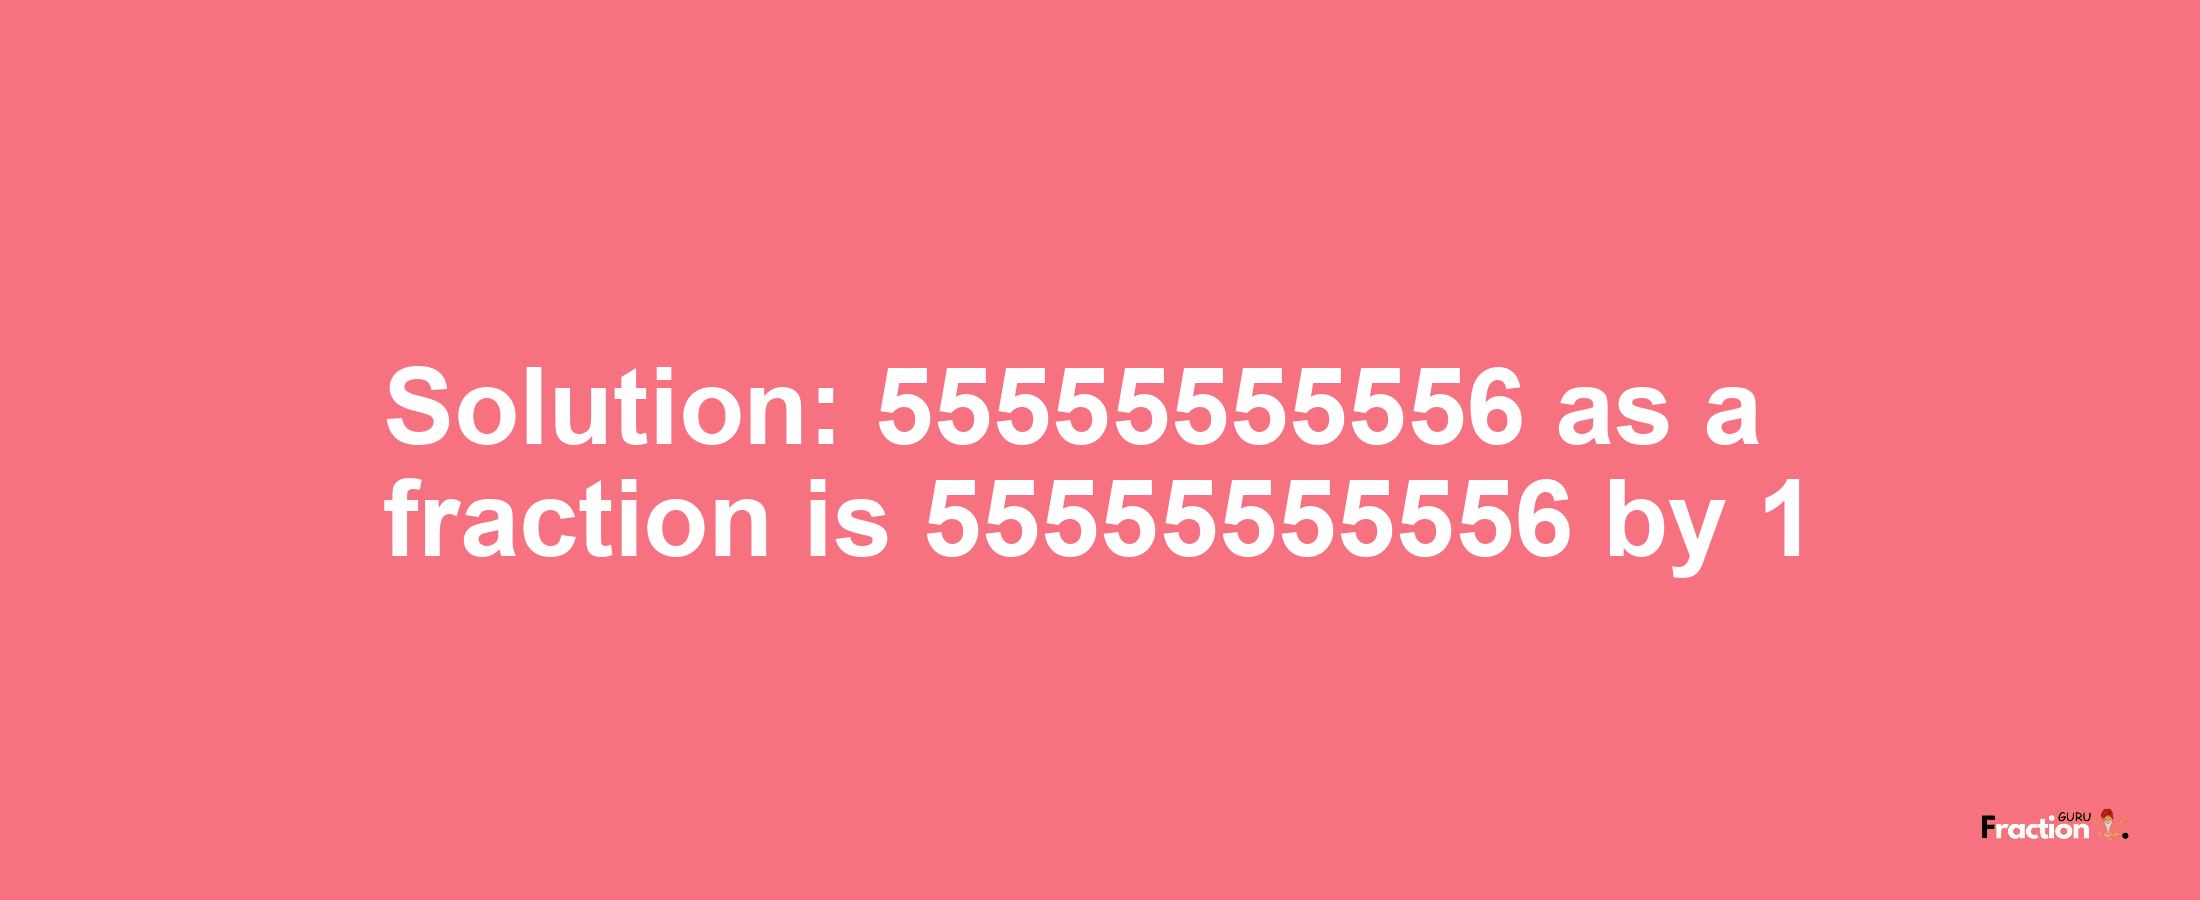 Solution:55555555556 as a fraction is 55555555556/1